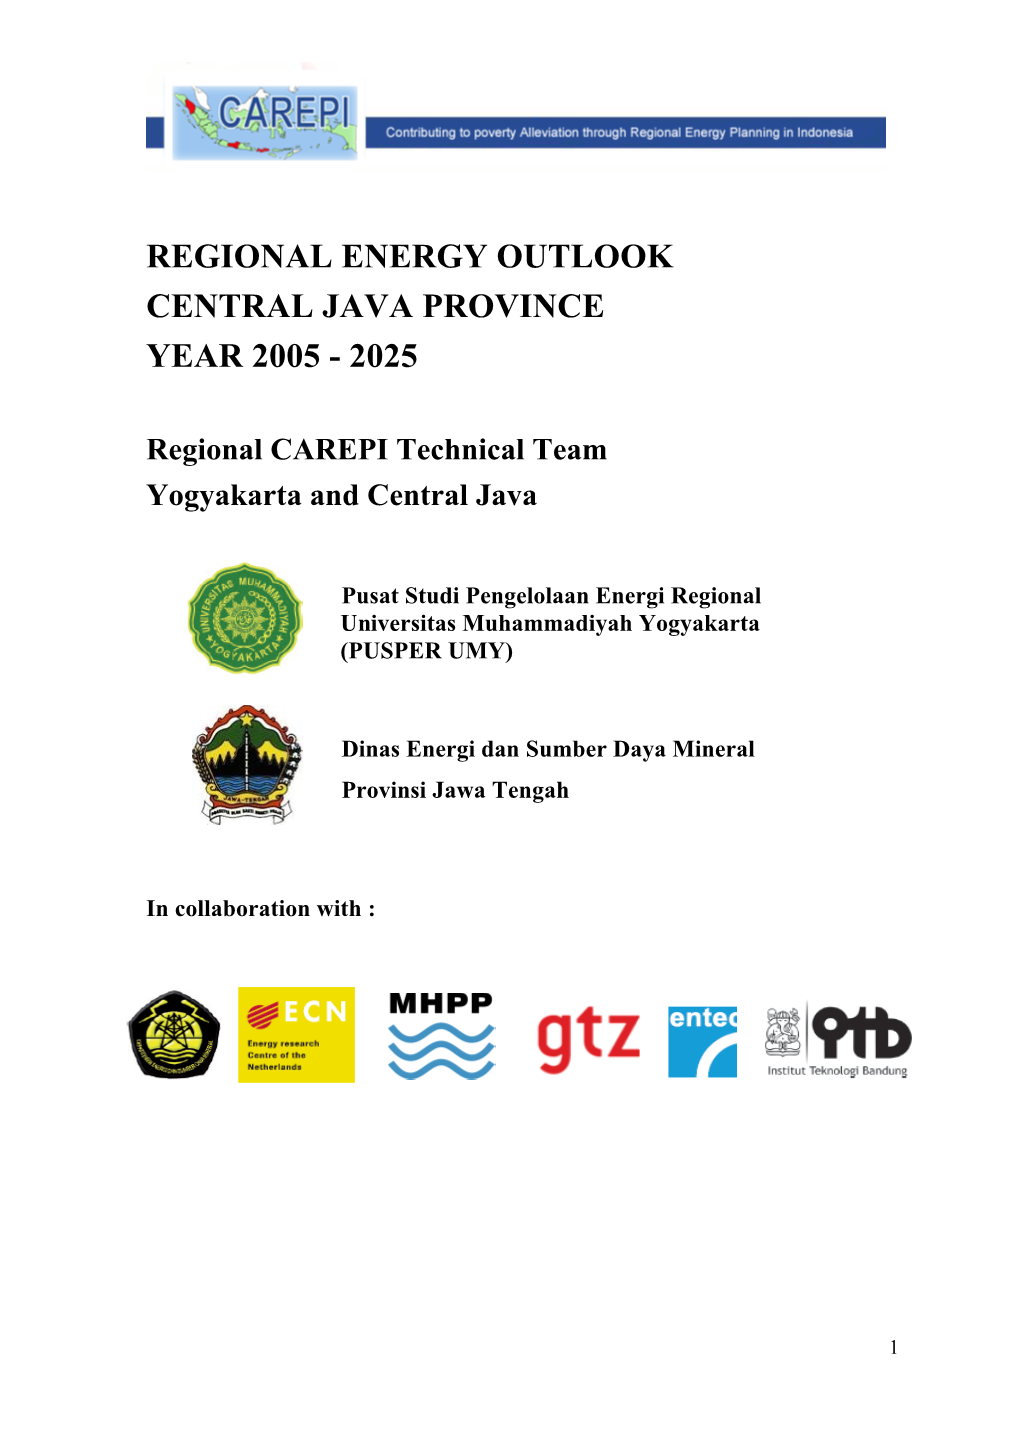 Regional Energy Outlook Central Java Province Year 2005 - 2025